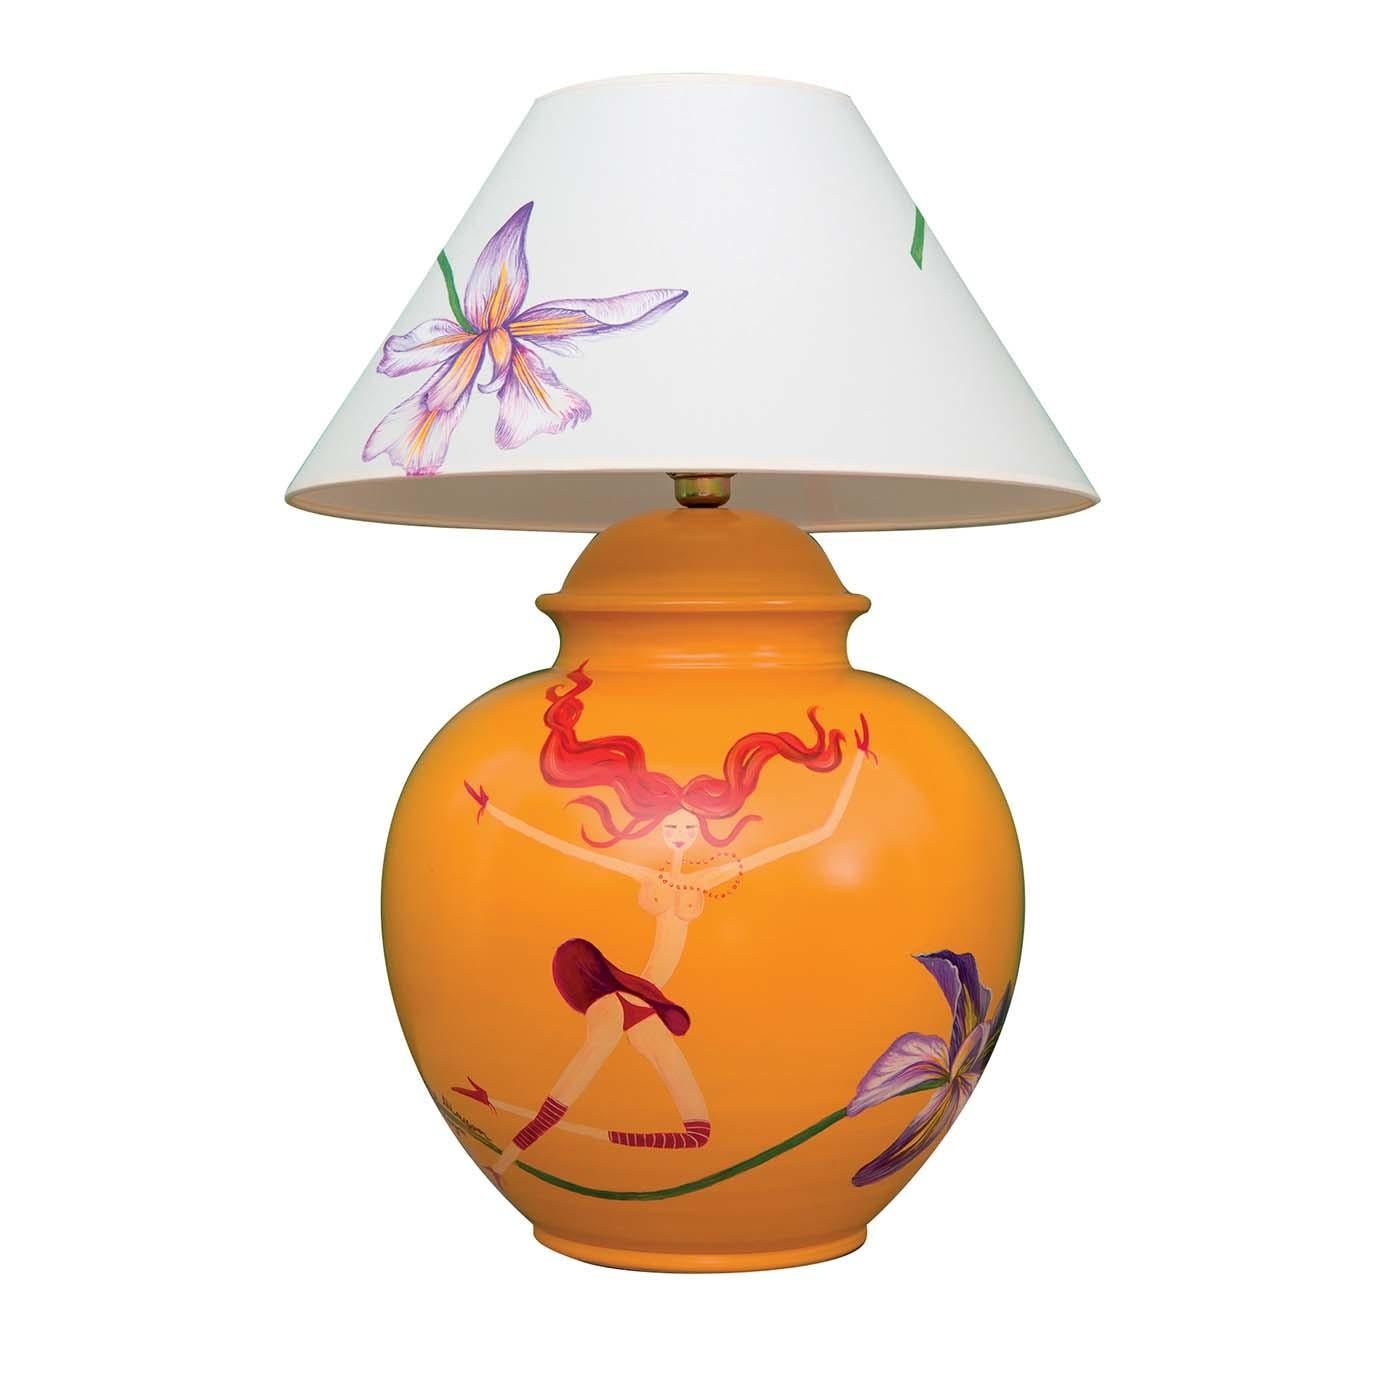 Colorful and refined, this splendid table lamp is composed of a base handcrafted of orange-lacquered clay and a lampshade in white fabric with large hand painted white lilies. Perfectly suited for an eclectic and modern interior, the body is painted